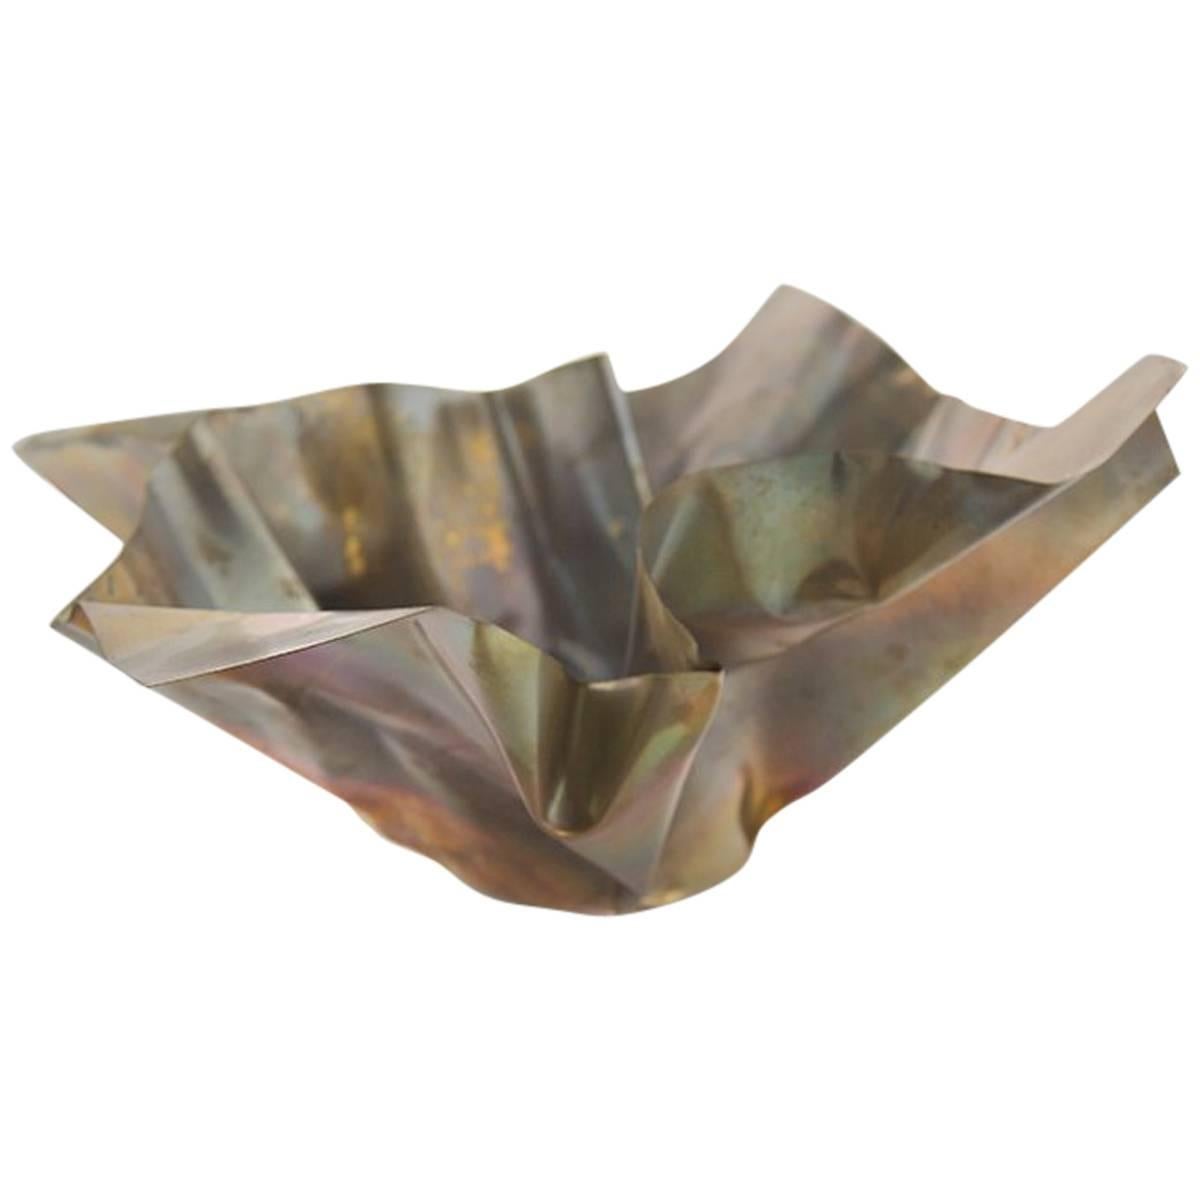 Paper Bowl 1, Made of Crumpled Brass Sheet, Handcrafted and Formed in Chicago